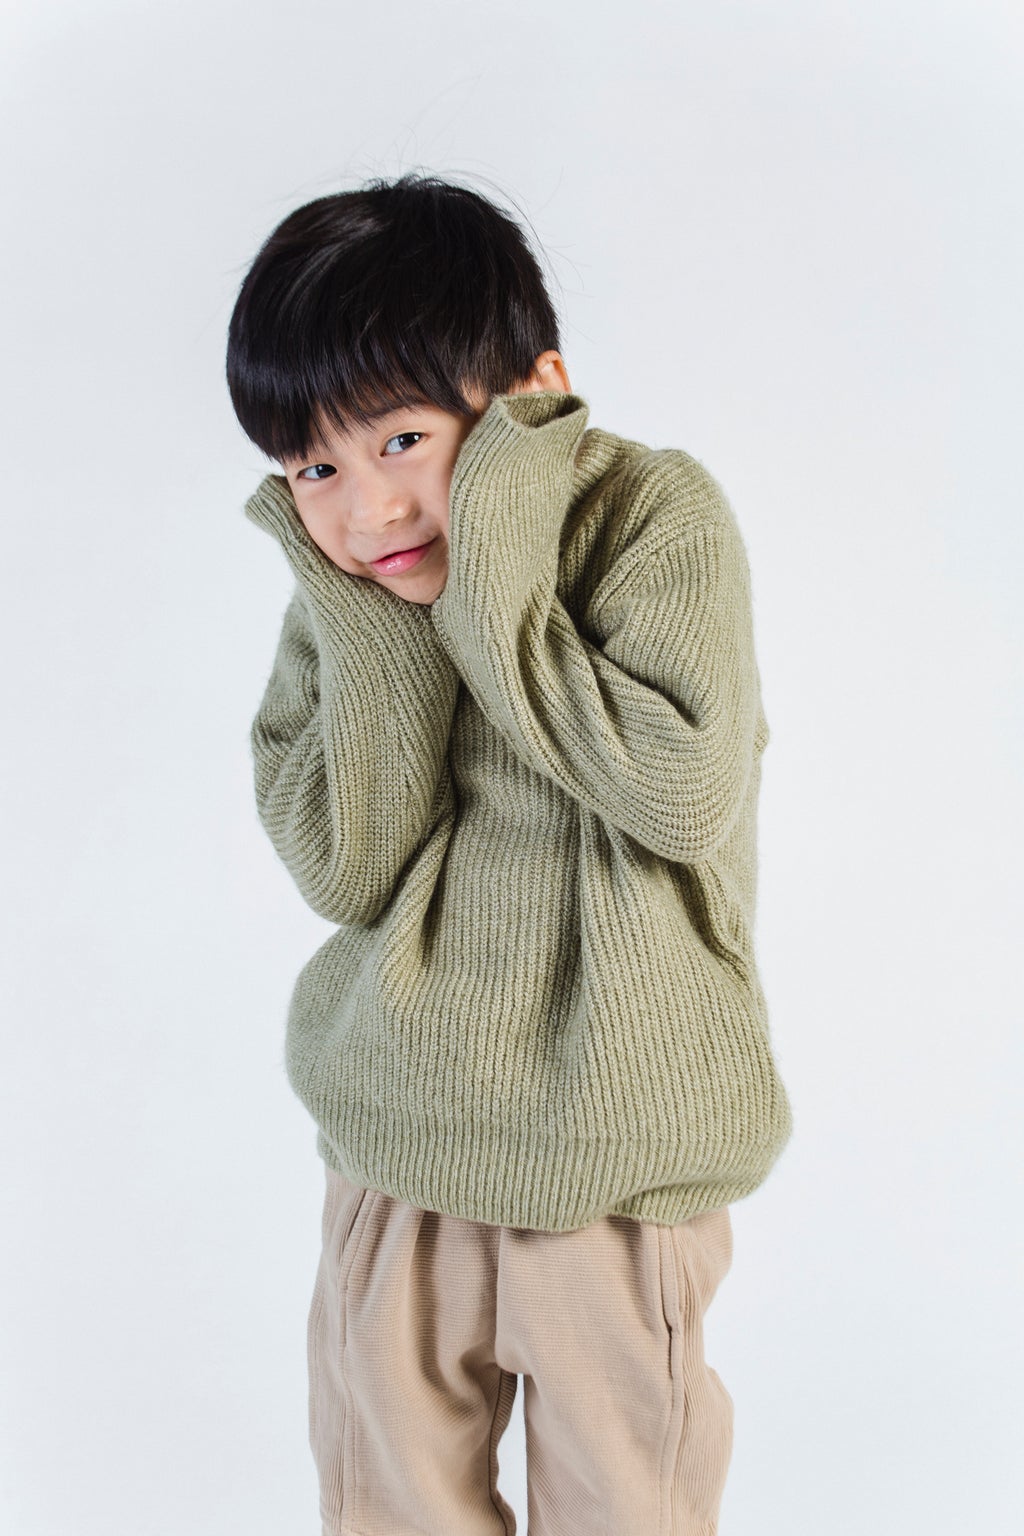 embarrassed young boy in green sweater